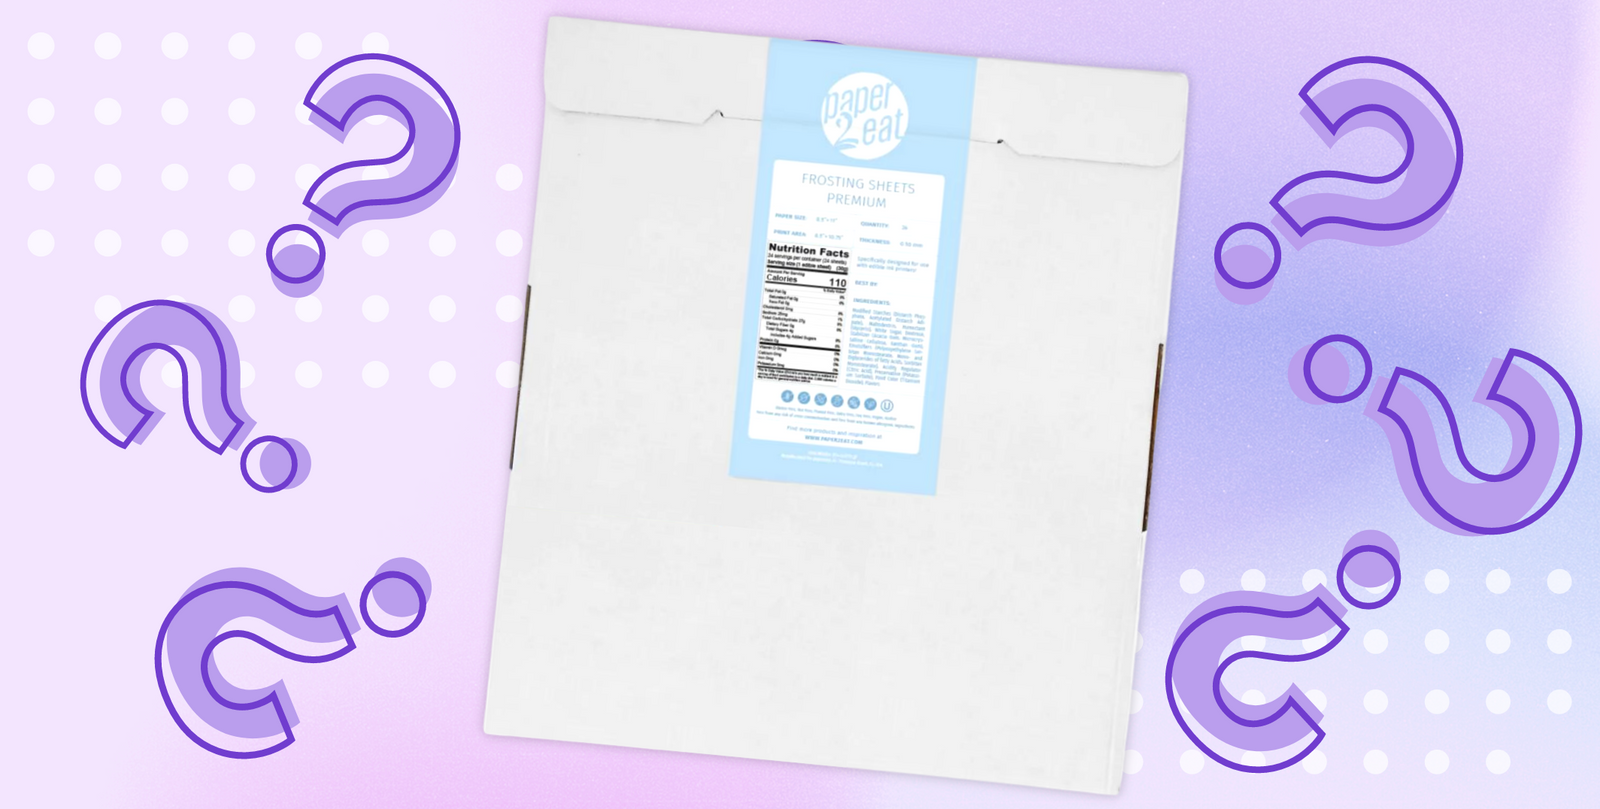 paper2eat Frosting Sheets Premium (Icing Sheets) 8.5“ x 11“ & 11.75“ x  16.25“ (A3-30 count)